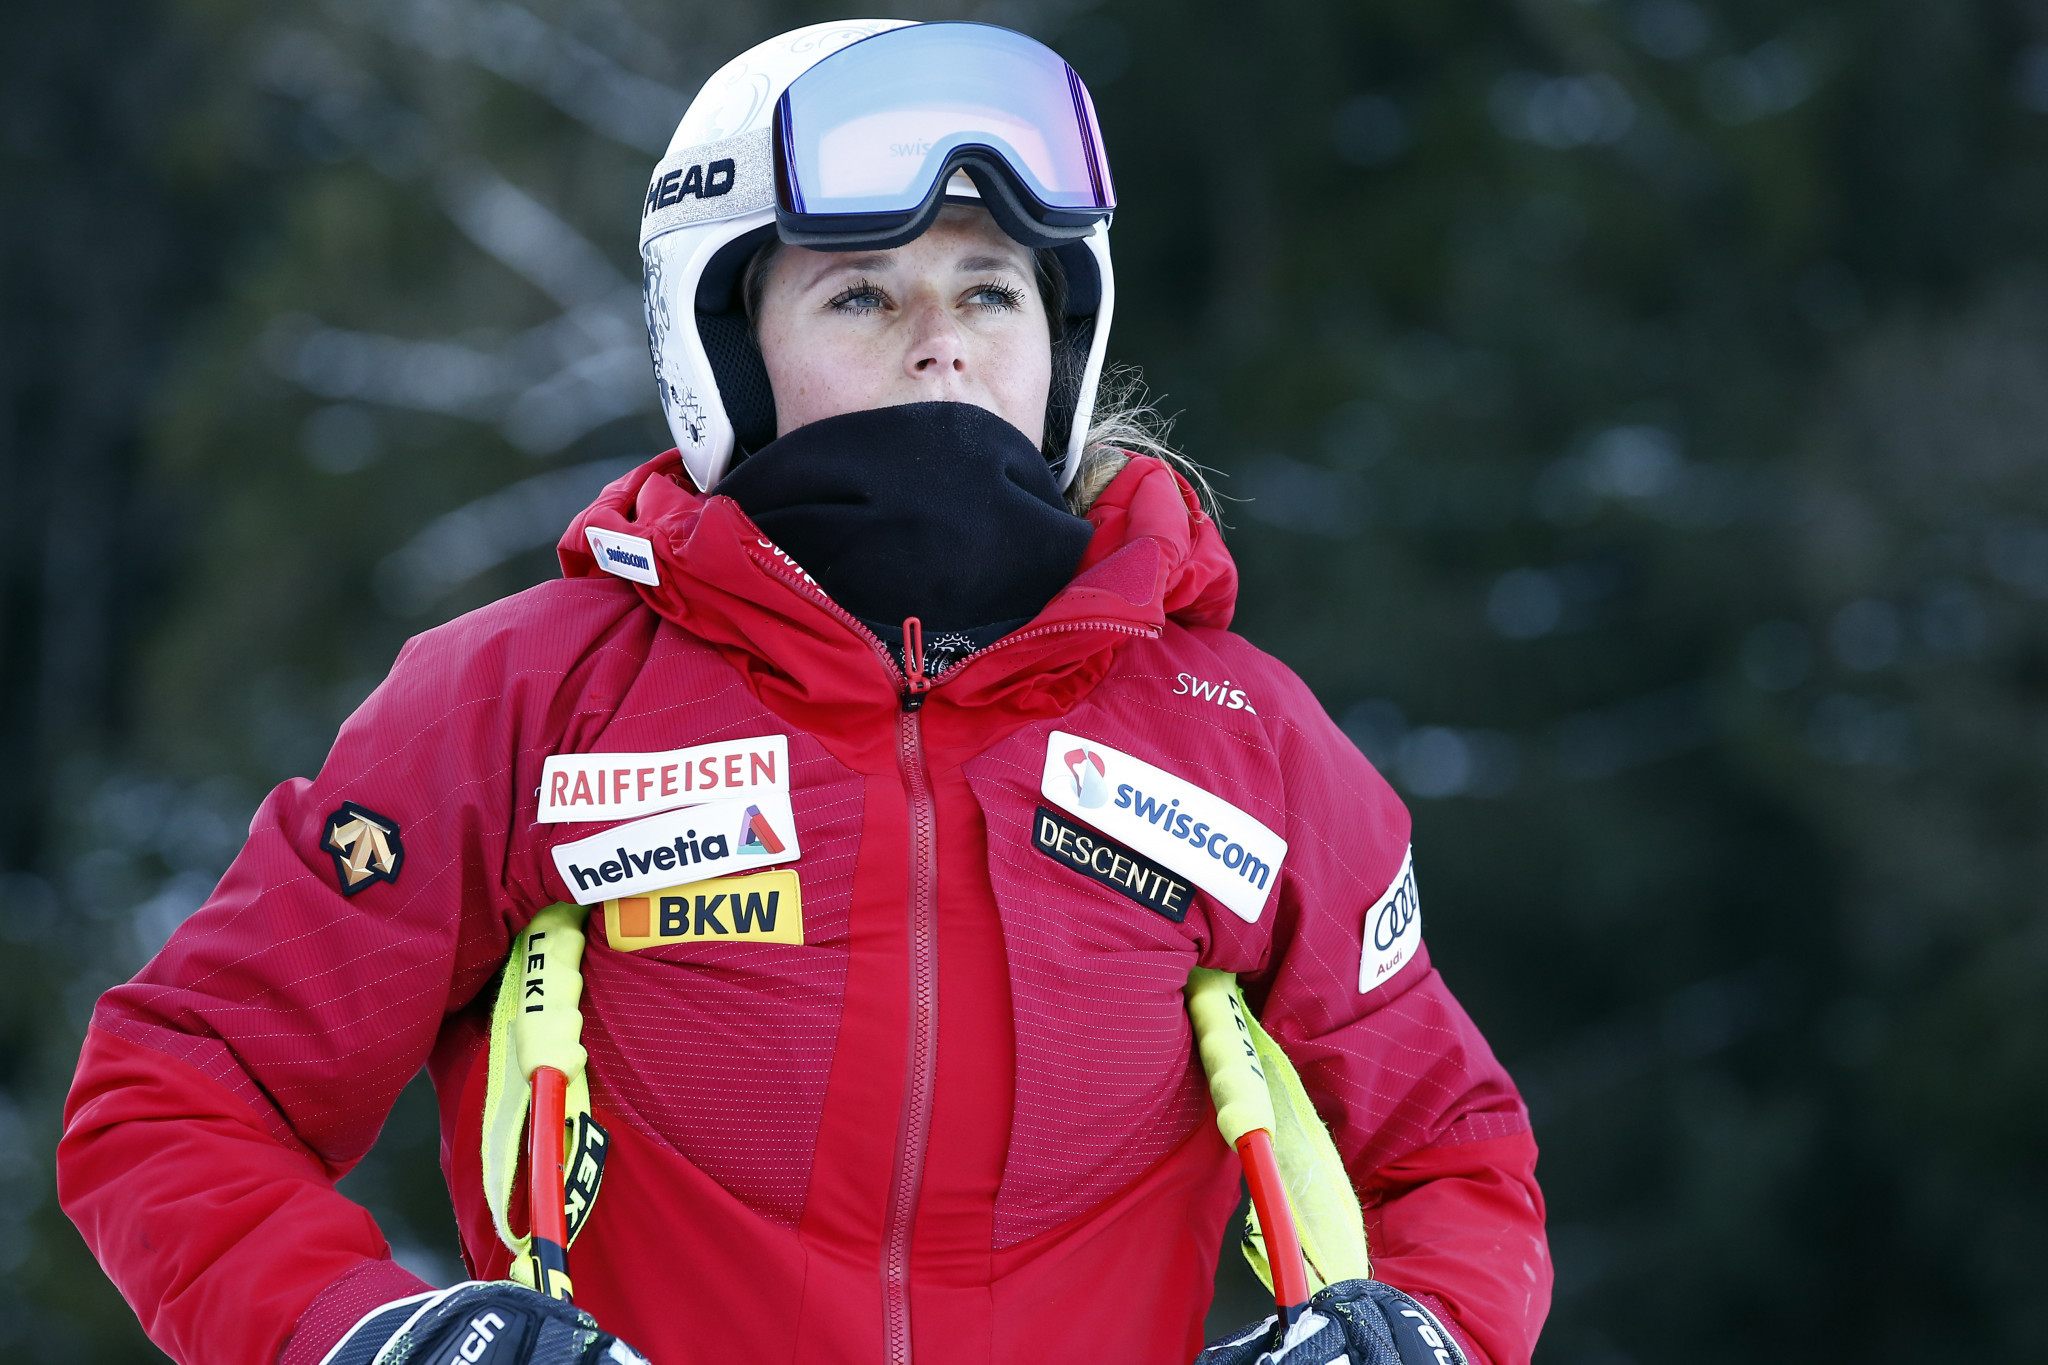 Suter set to extend World Cup downhill lead in Shiffrin's absence